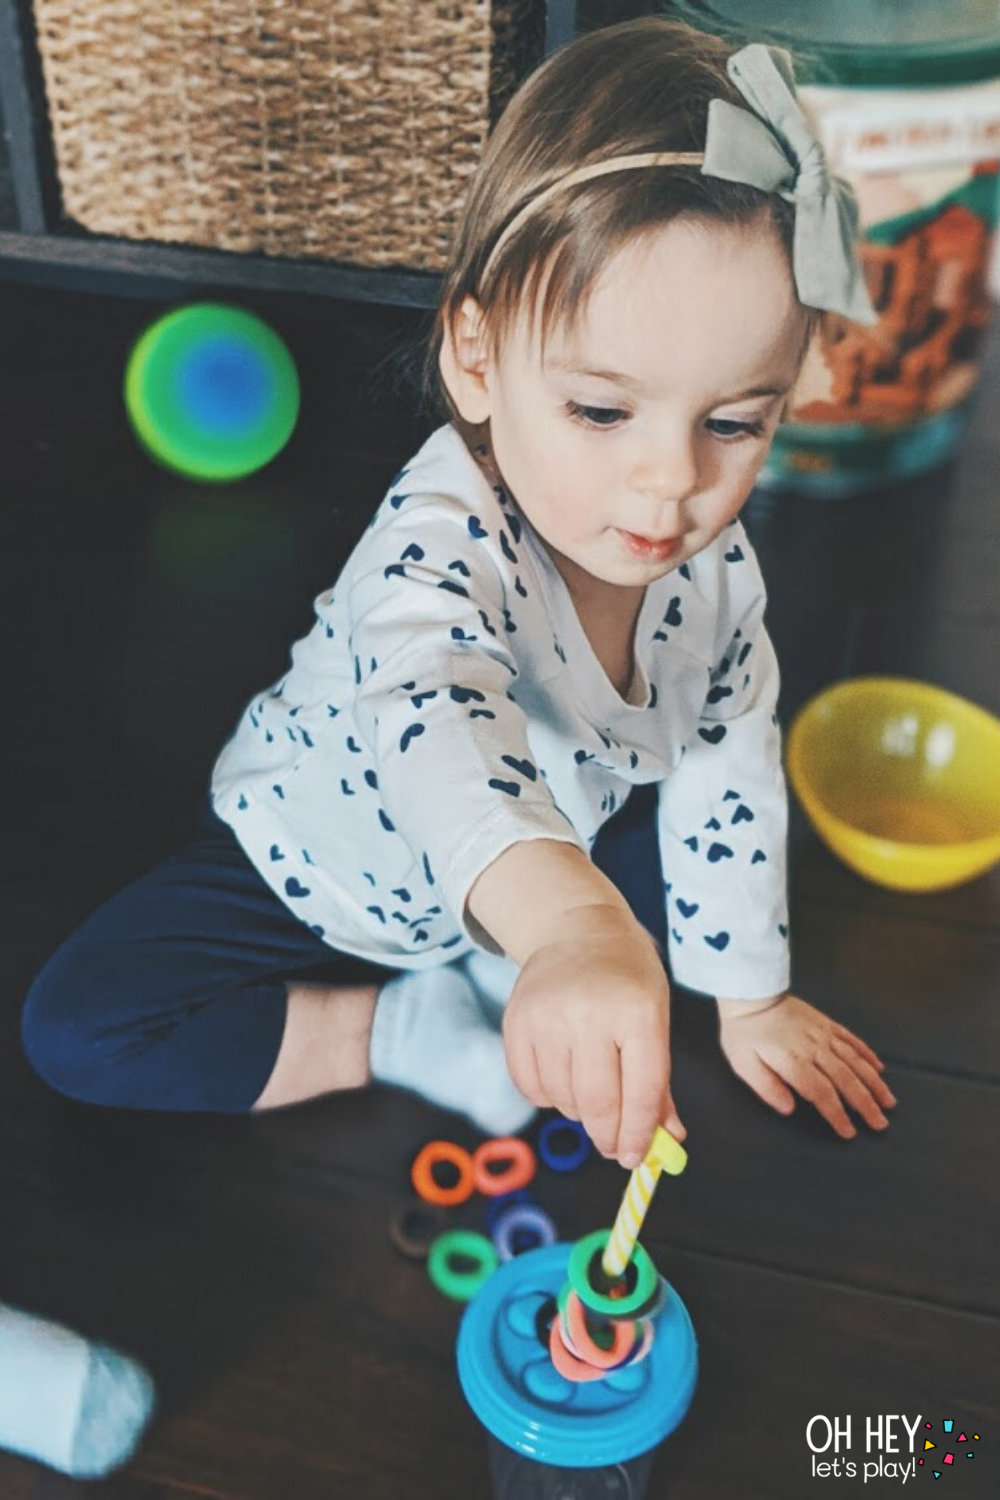 Activities for 1-2 Year Old Toddlers — Oh Hey Let's Play